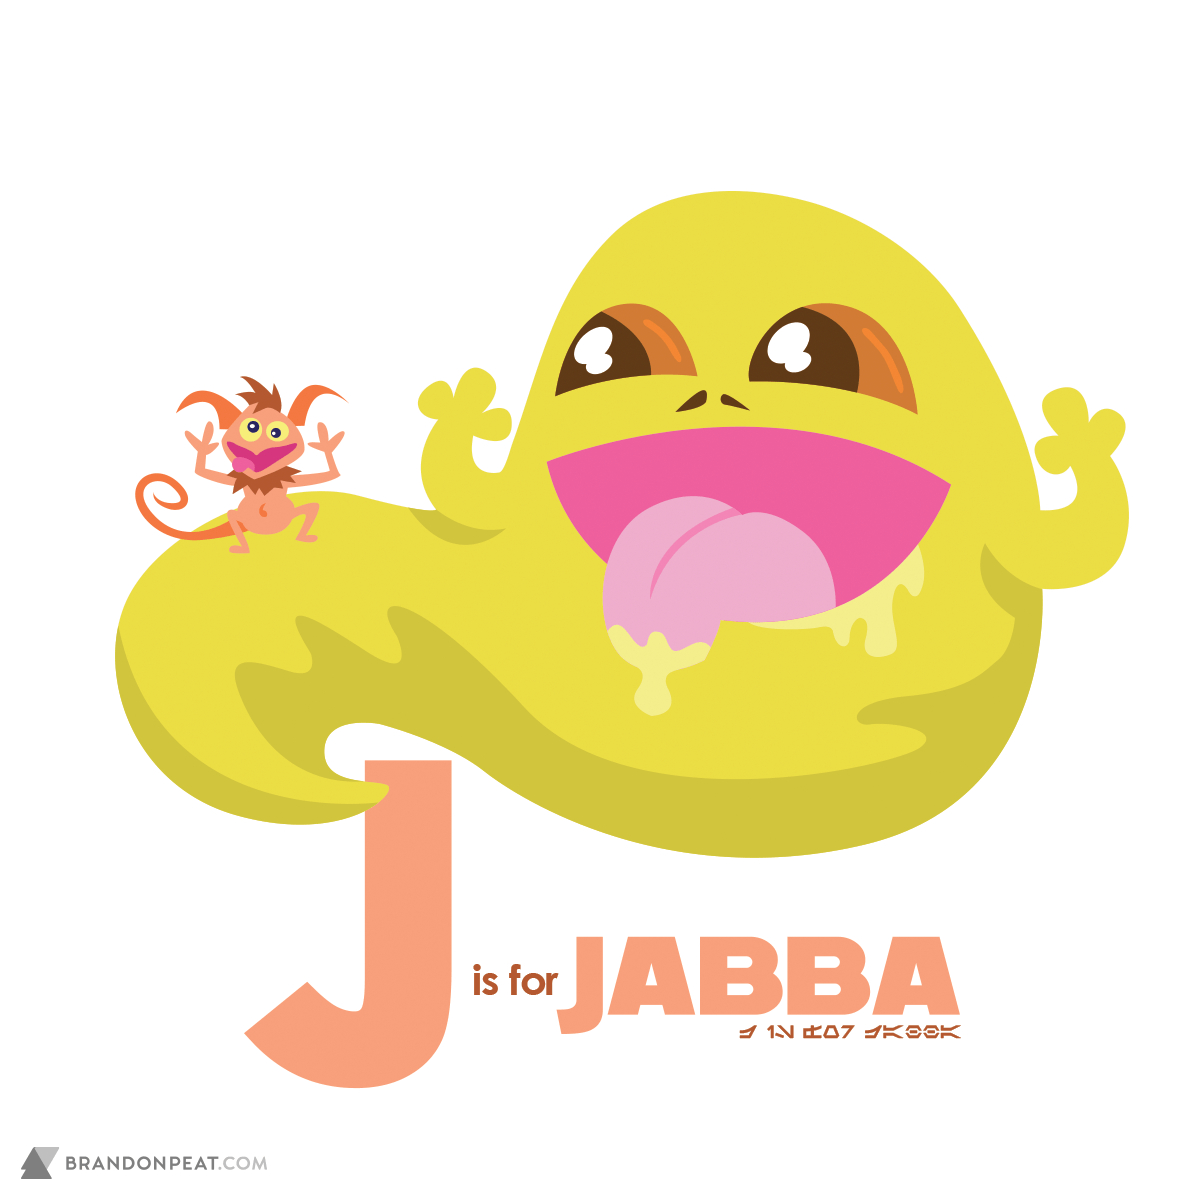 A Is For Ackbar: J Is For Jabba the Hutt